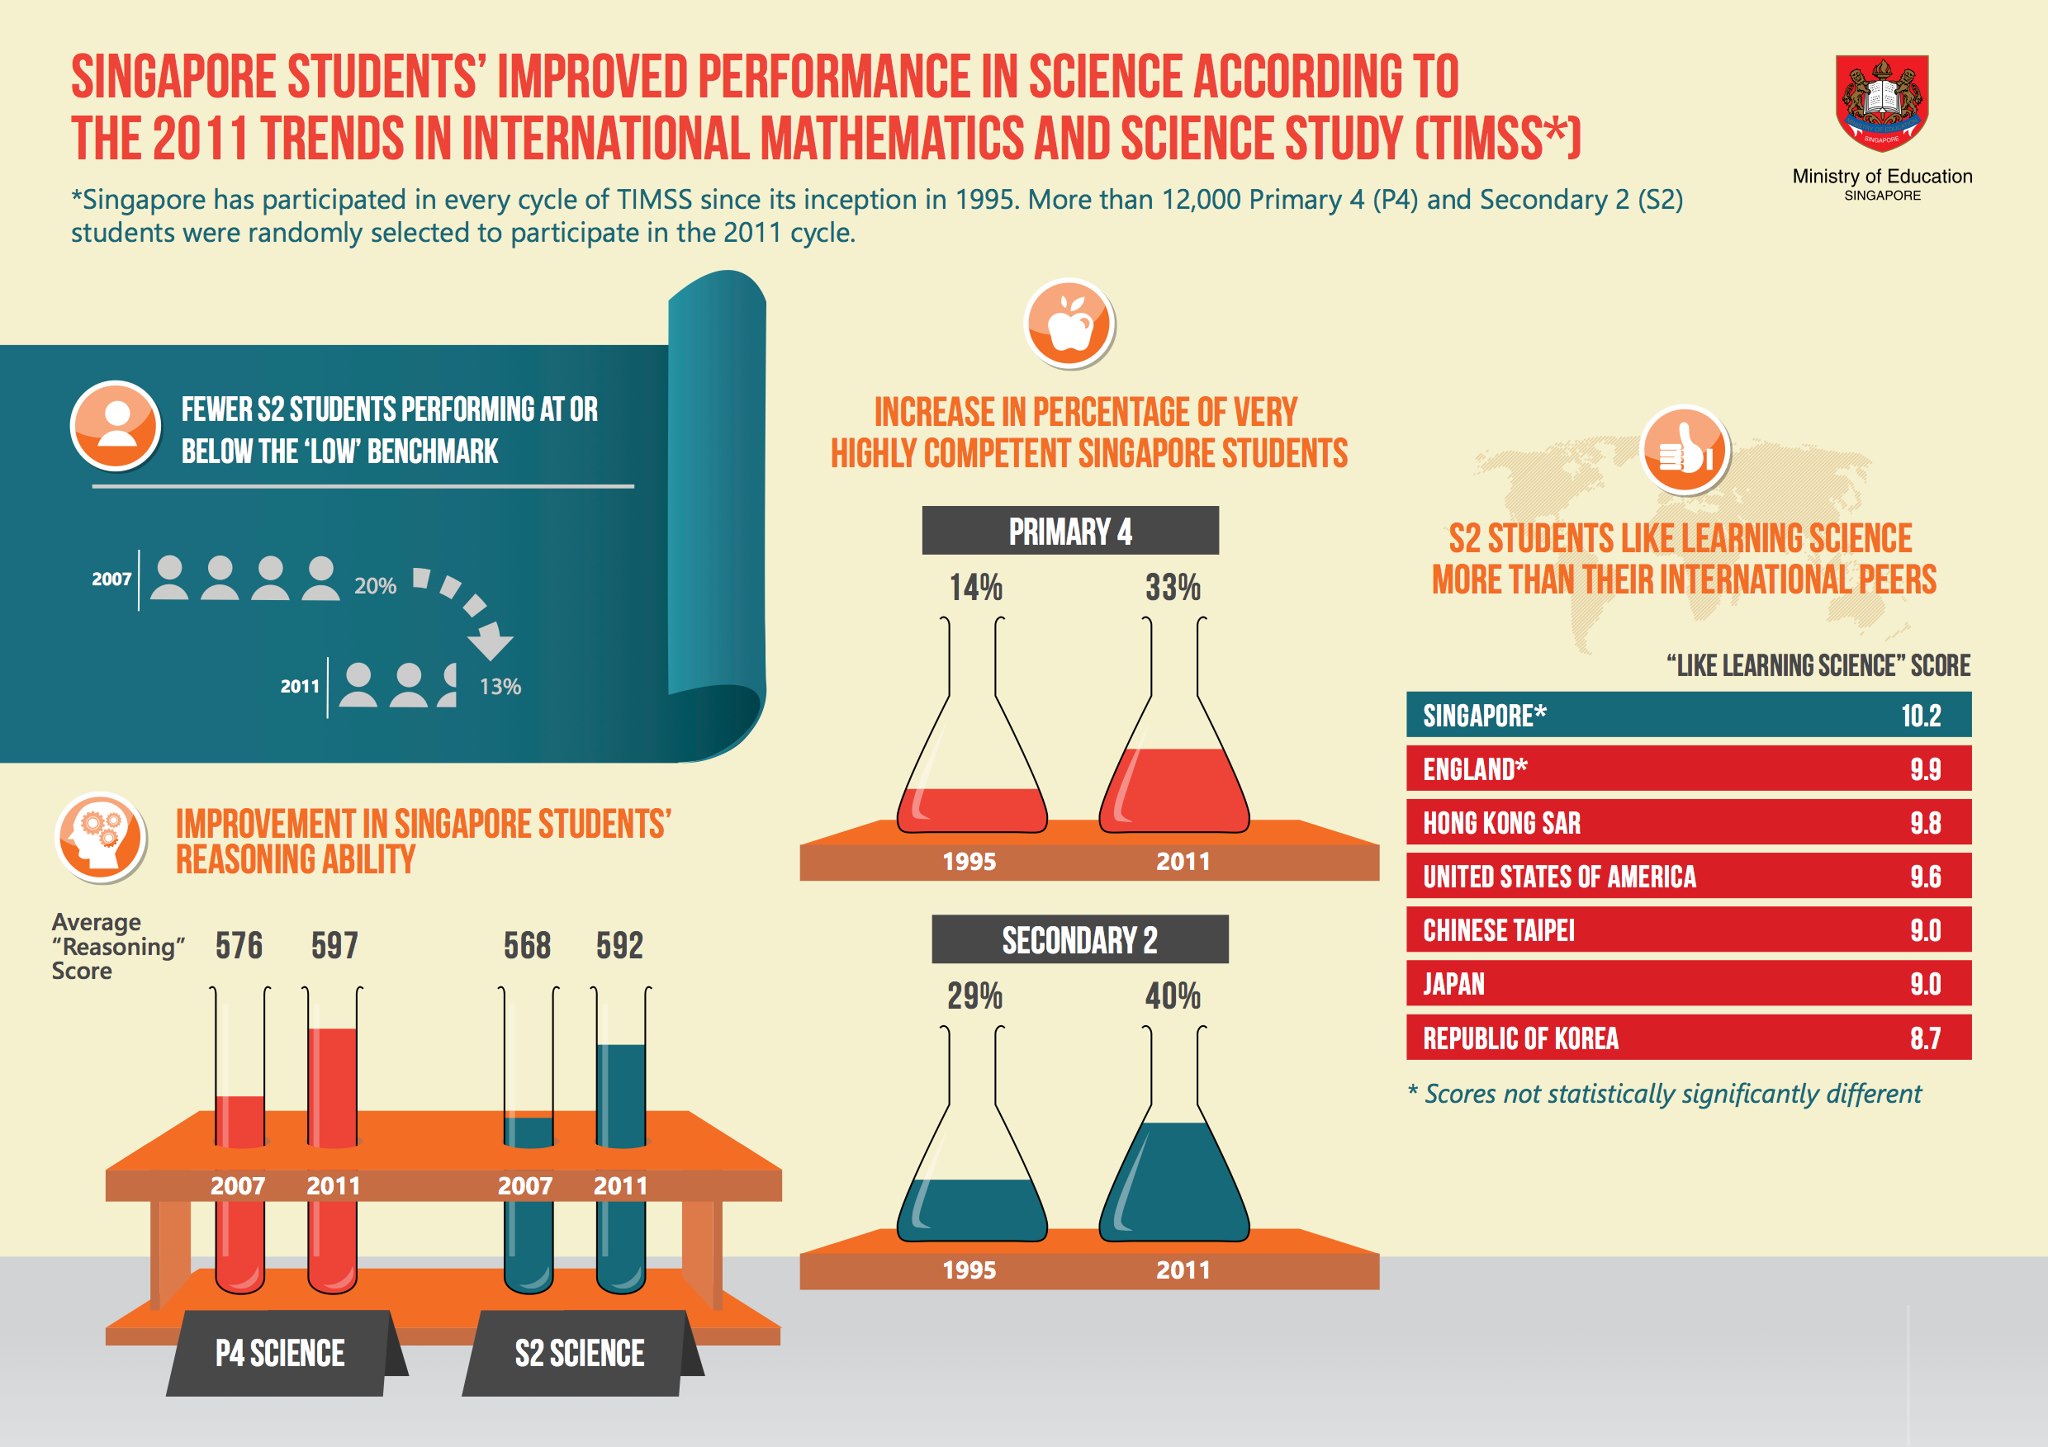 Singapore Students' Improved Performance in Science according to the 2011 Trends in TIMSS